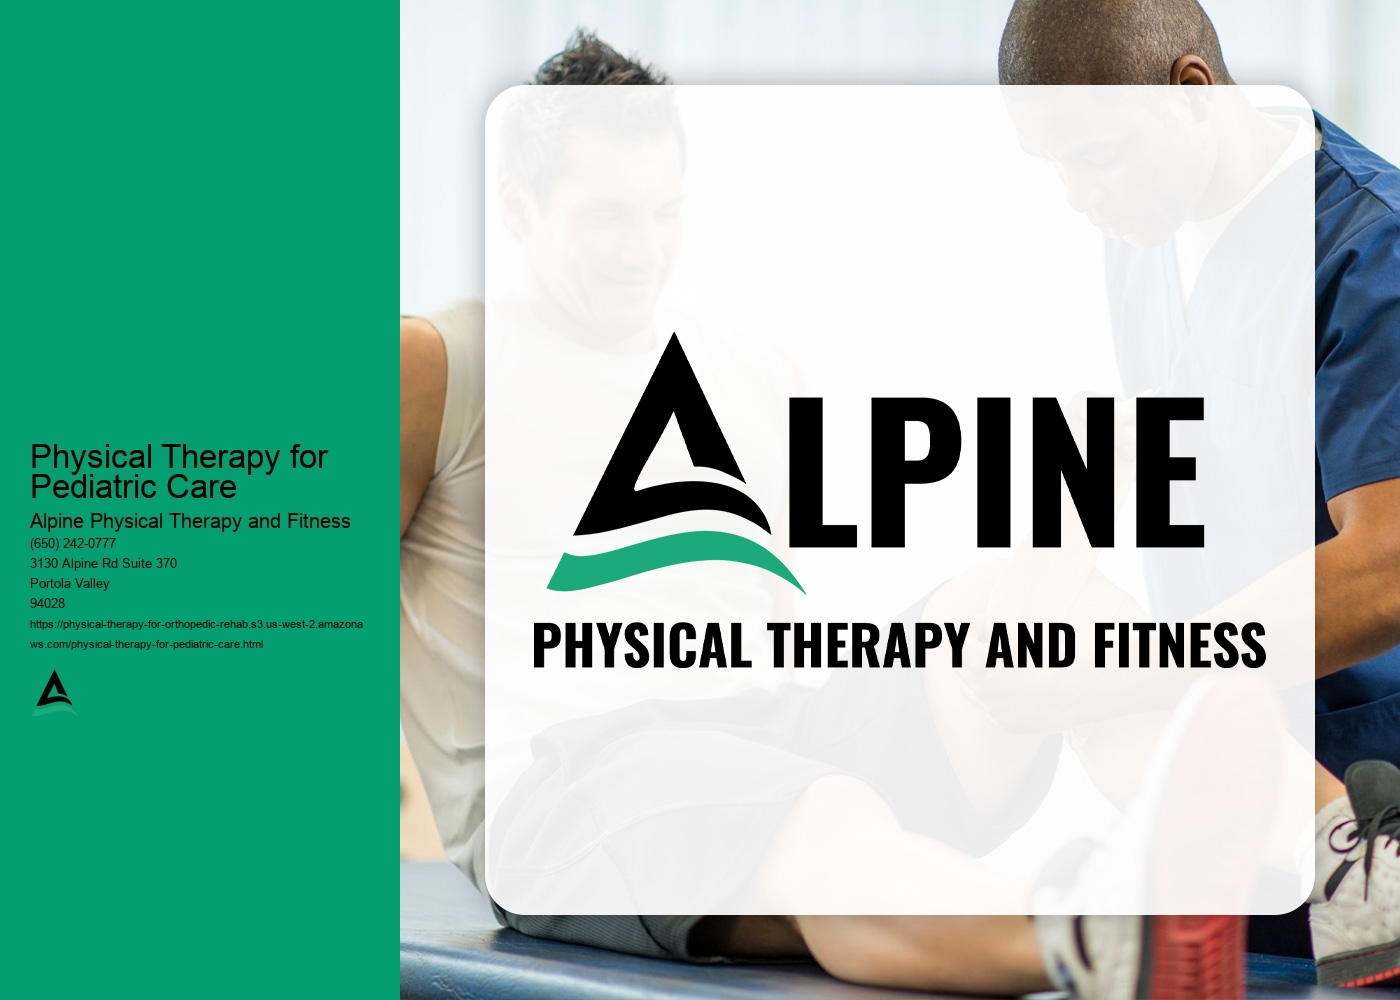 What are some common conditions that can be treated with pediatric physical therapy?